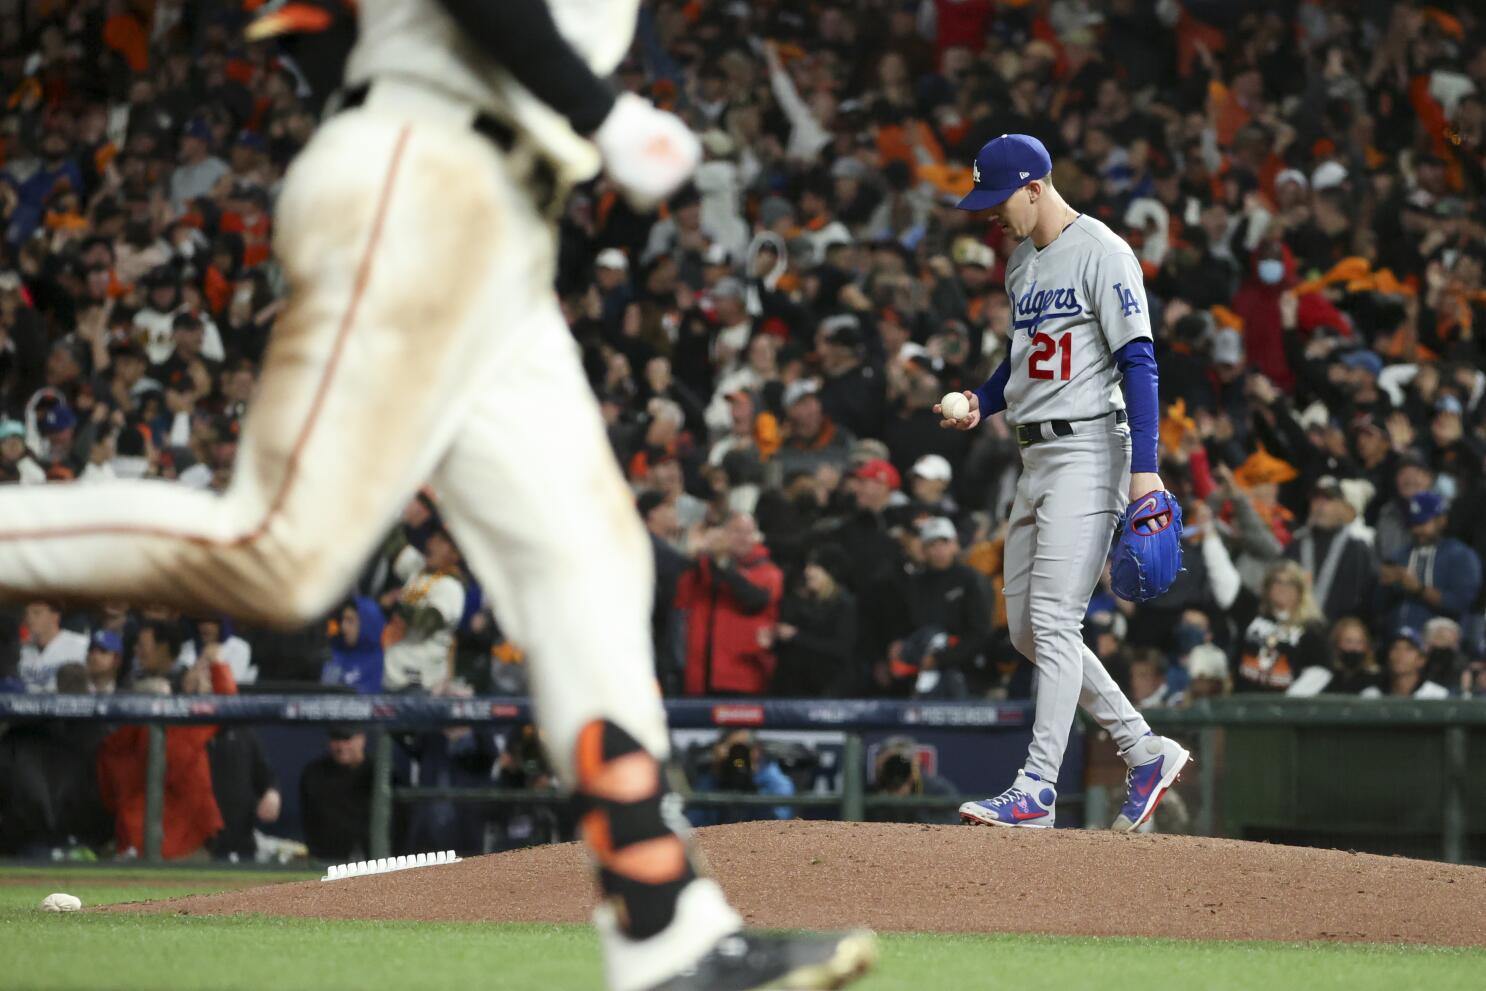 Brandon Crawford's wife shows how ruthless Dodgers crowd was